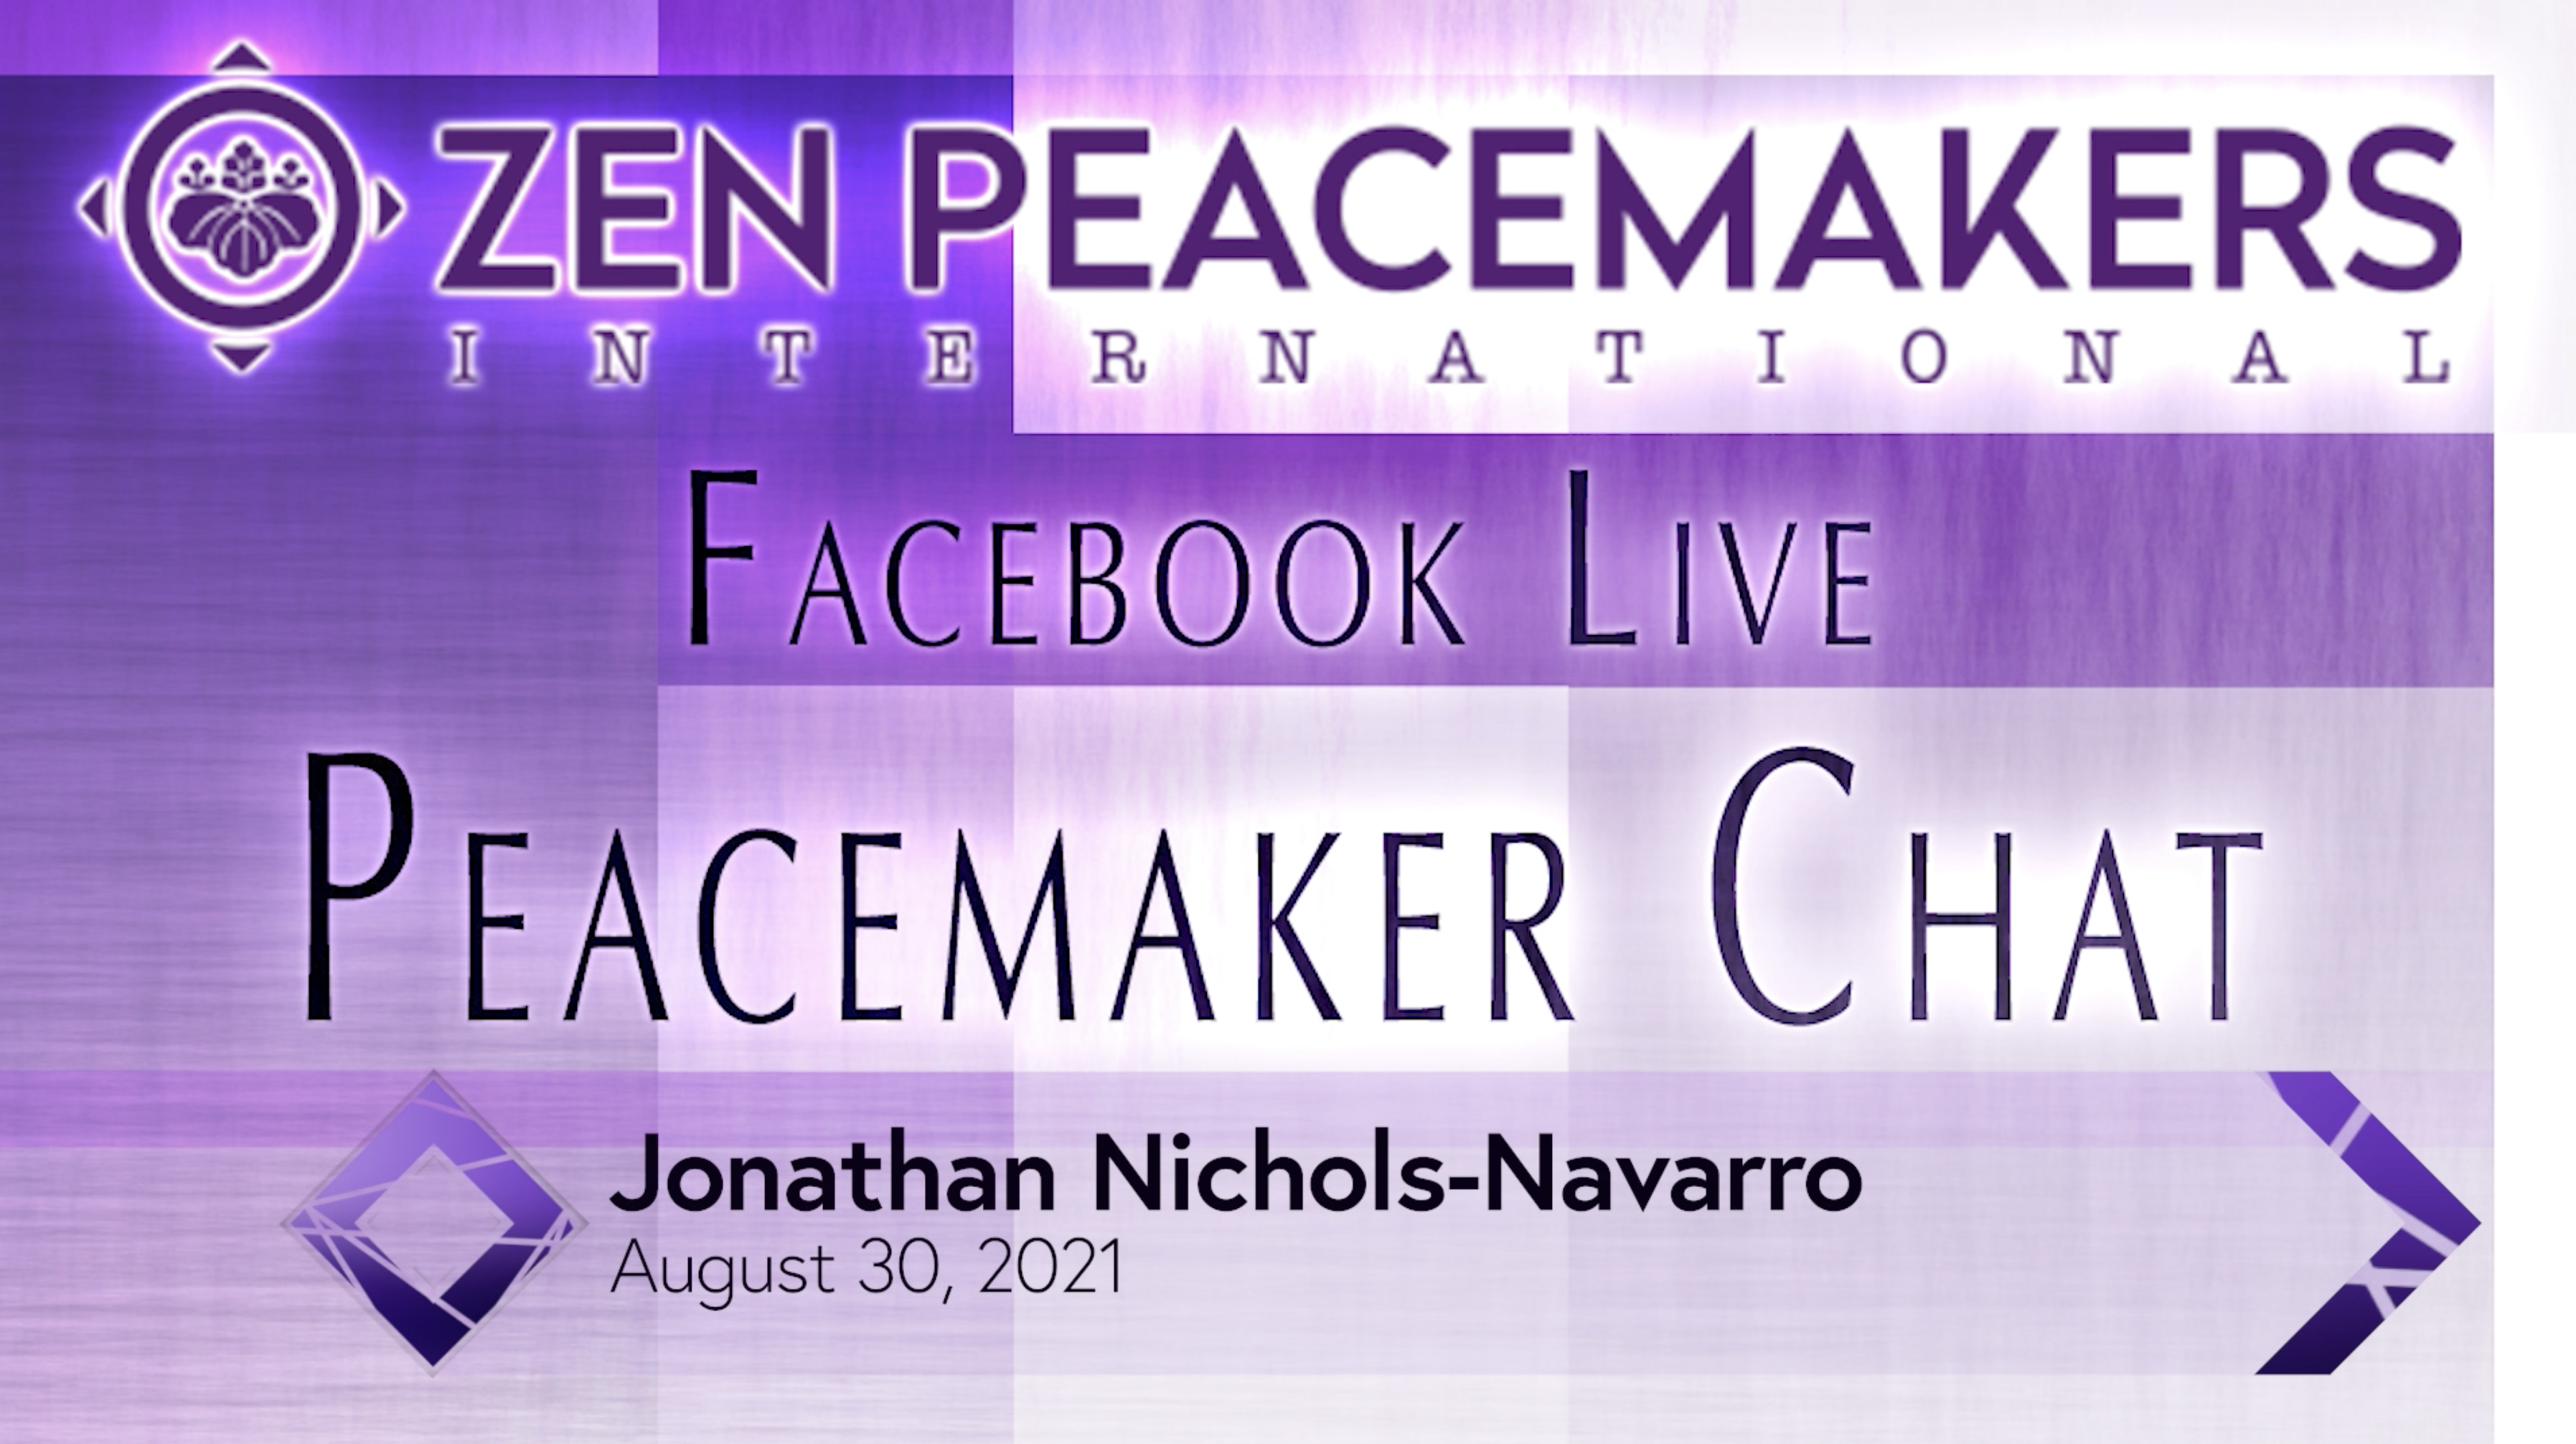 Peacemaker Chat – “Who Am I?_Quien Soy?” with Jonathan Nichols-Navarro